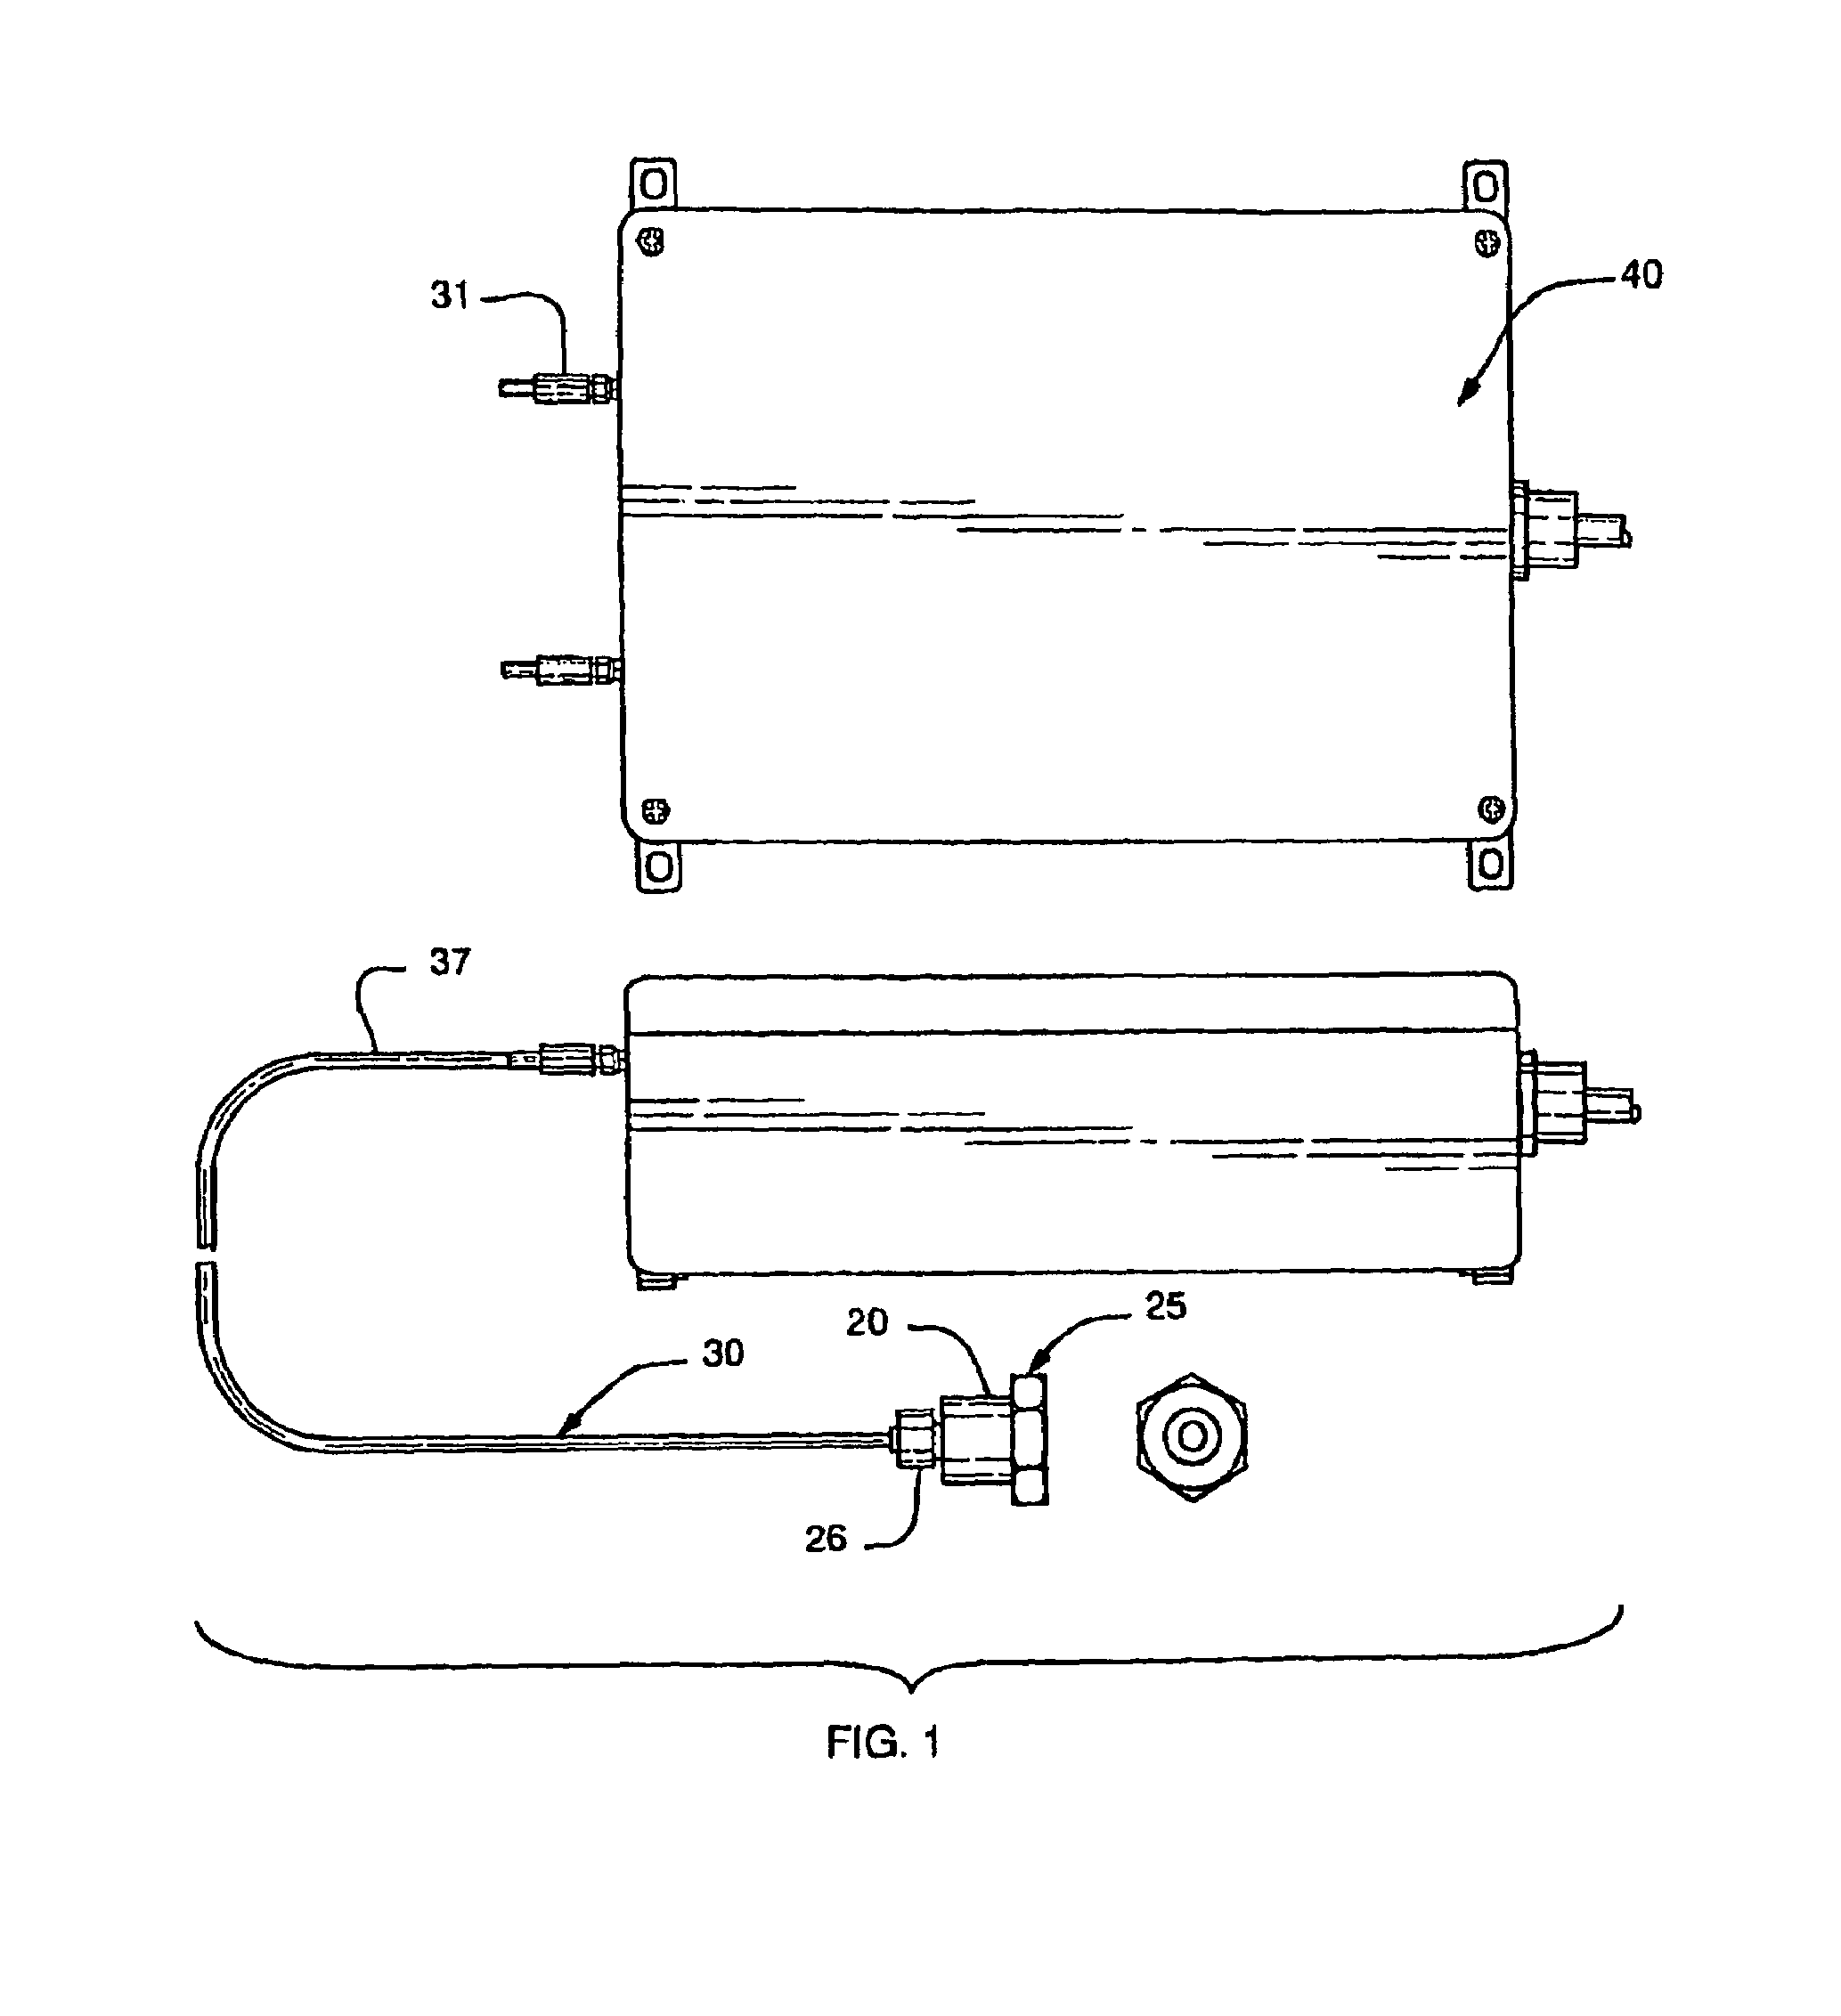 Method and apparatus for detecting the presence of flame in the exhaust path of a gas turbine engine